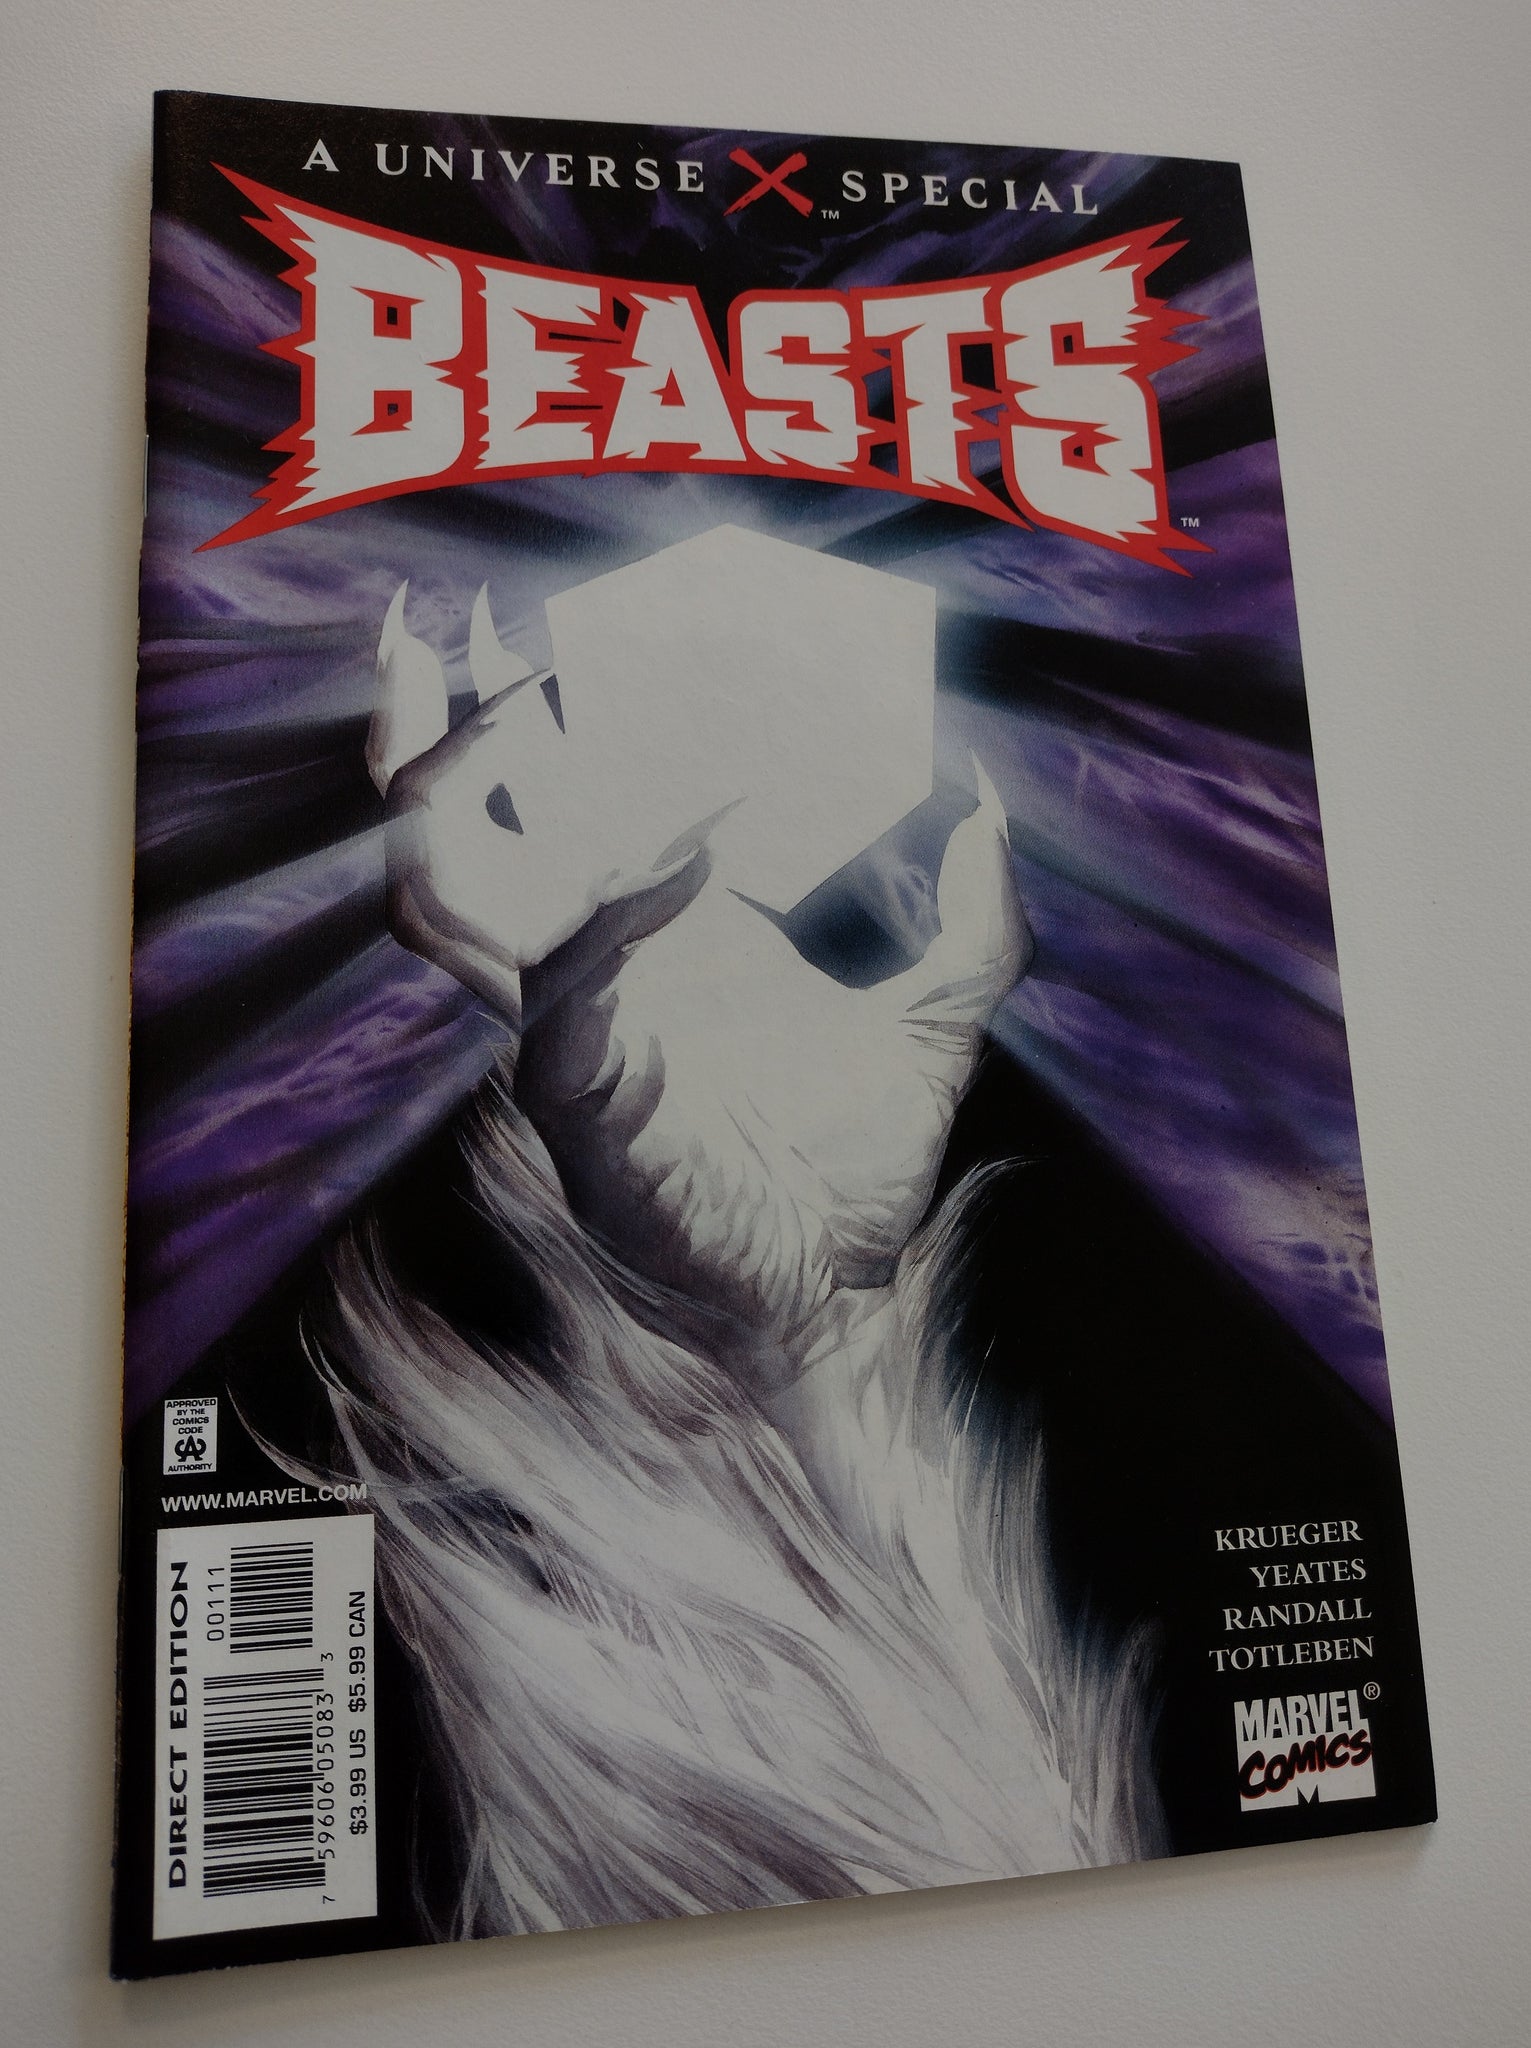 Universe X Special Beasts #1 VF/NM